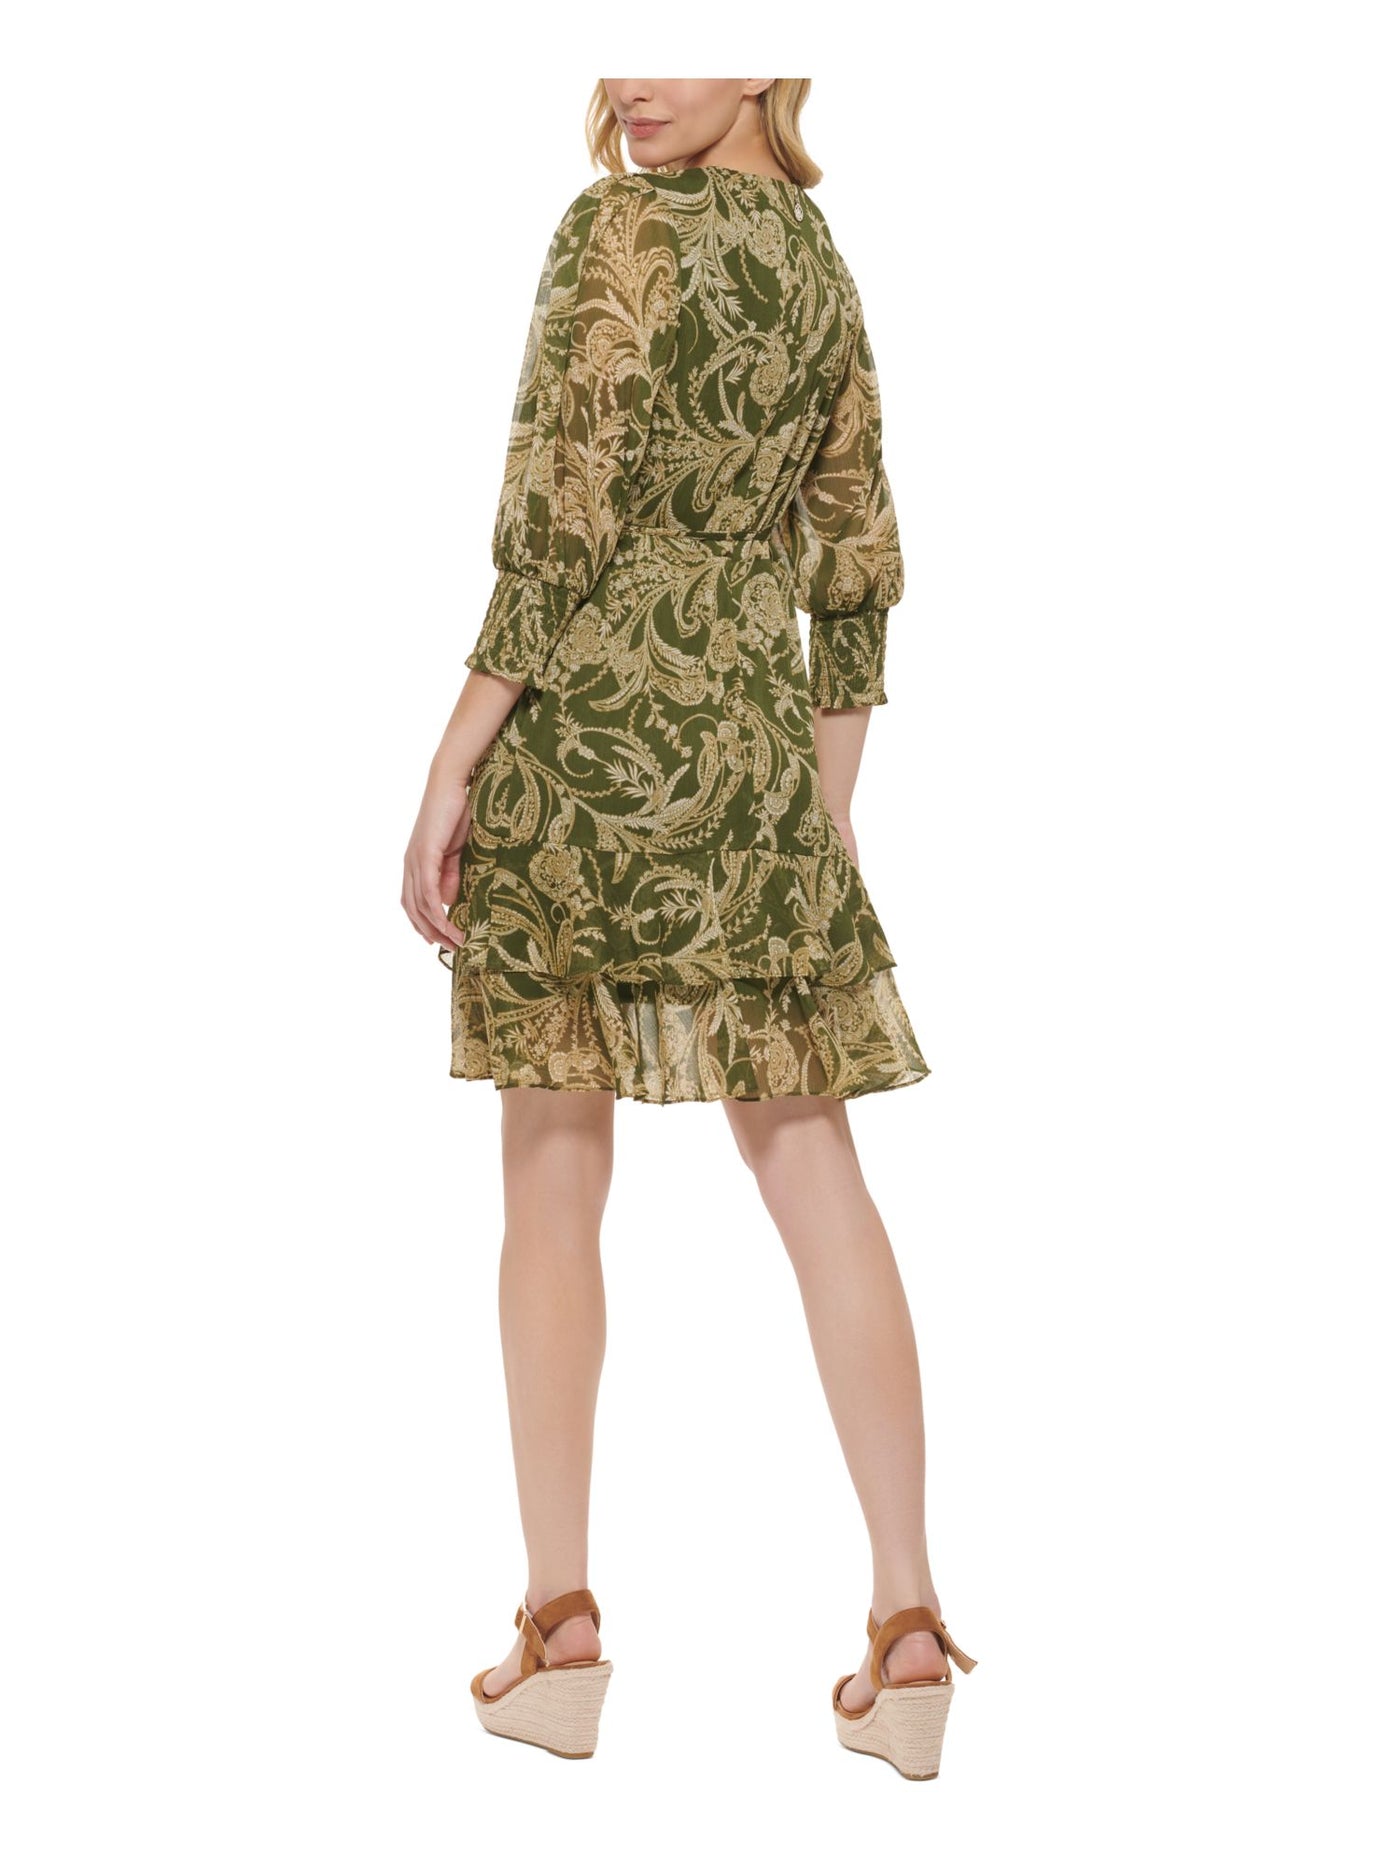 TOMMY HILFIGER Womens Green Zippered Lined Sheer Tie Belt Wrap Look Floral 3/4 Sleeve Surplice Neckline Above The Knee Fit + Flare Dress 8